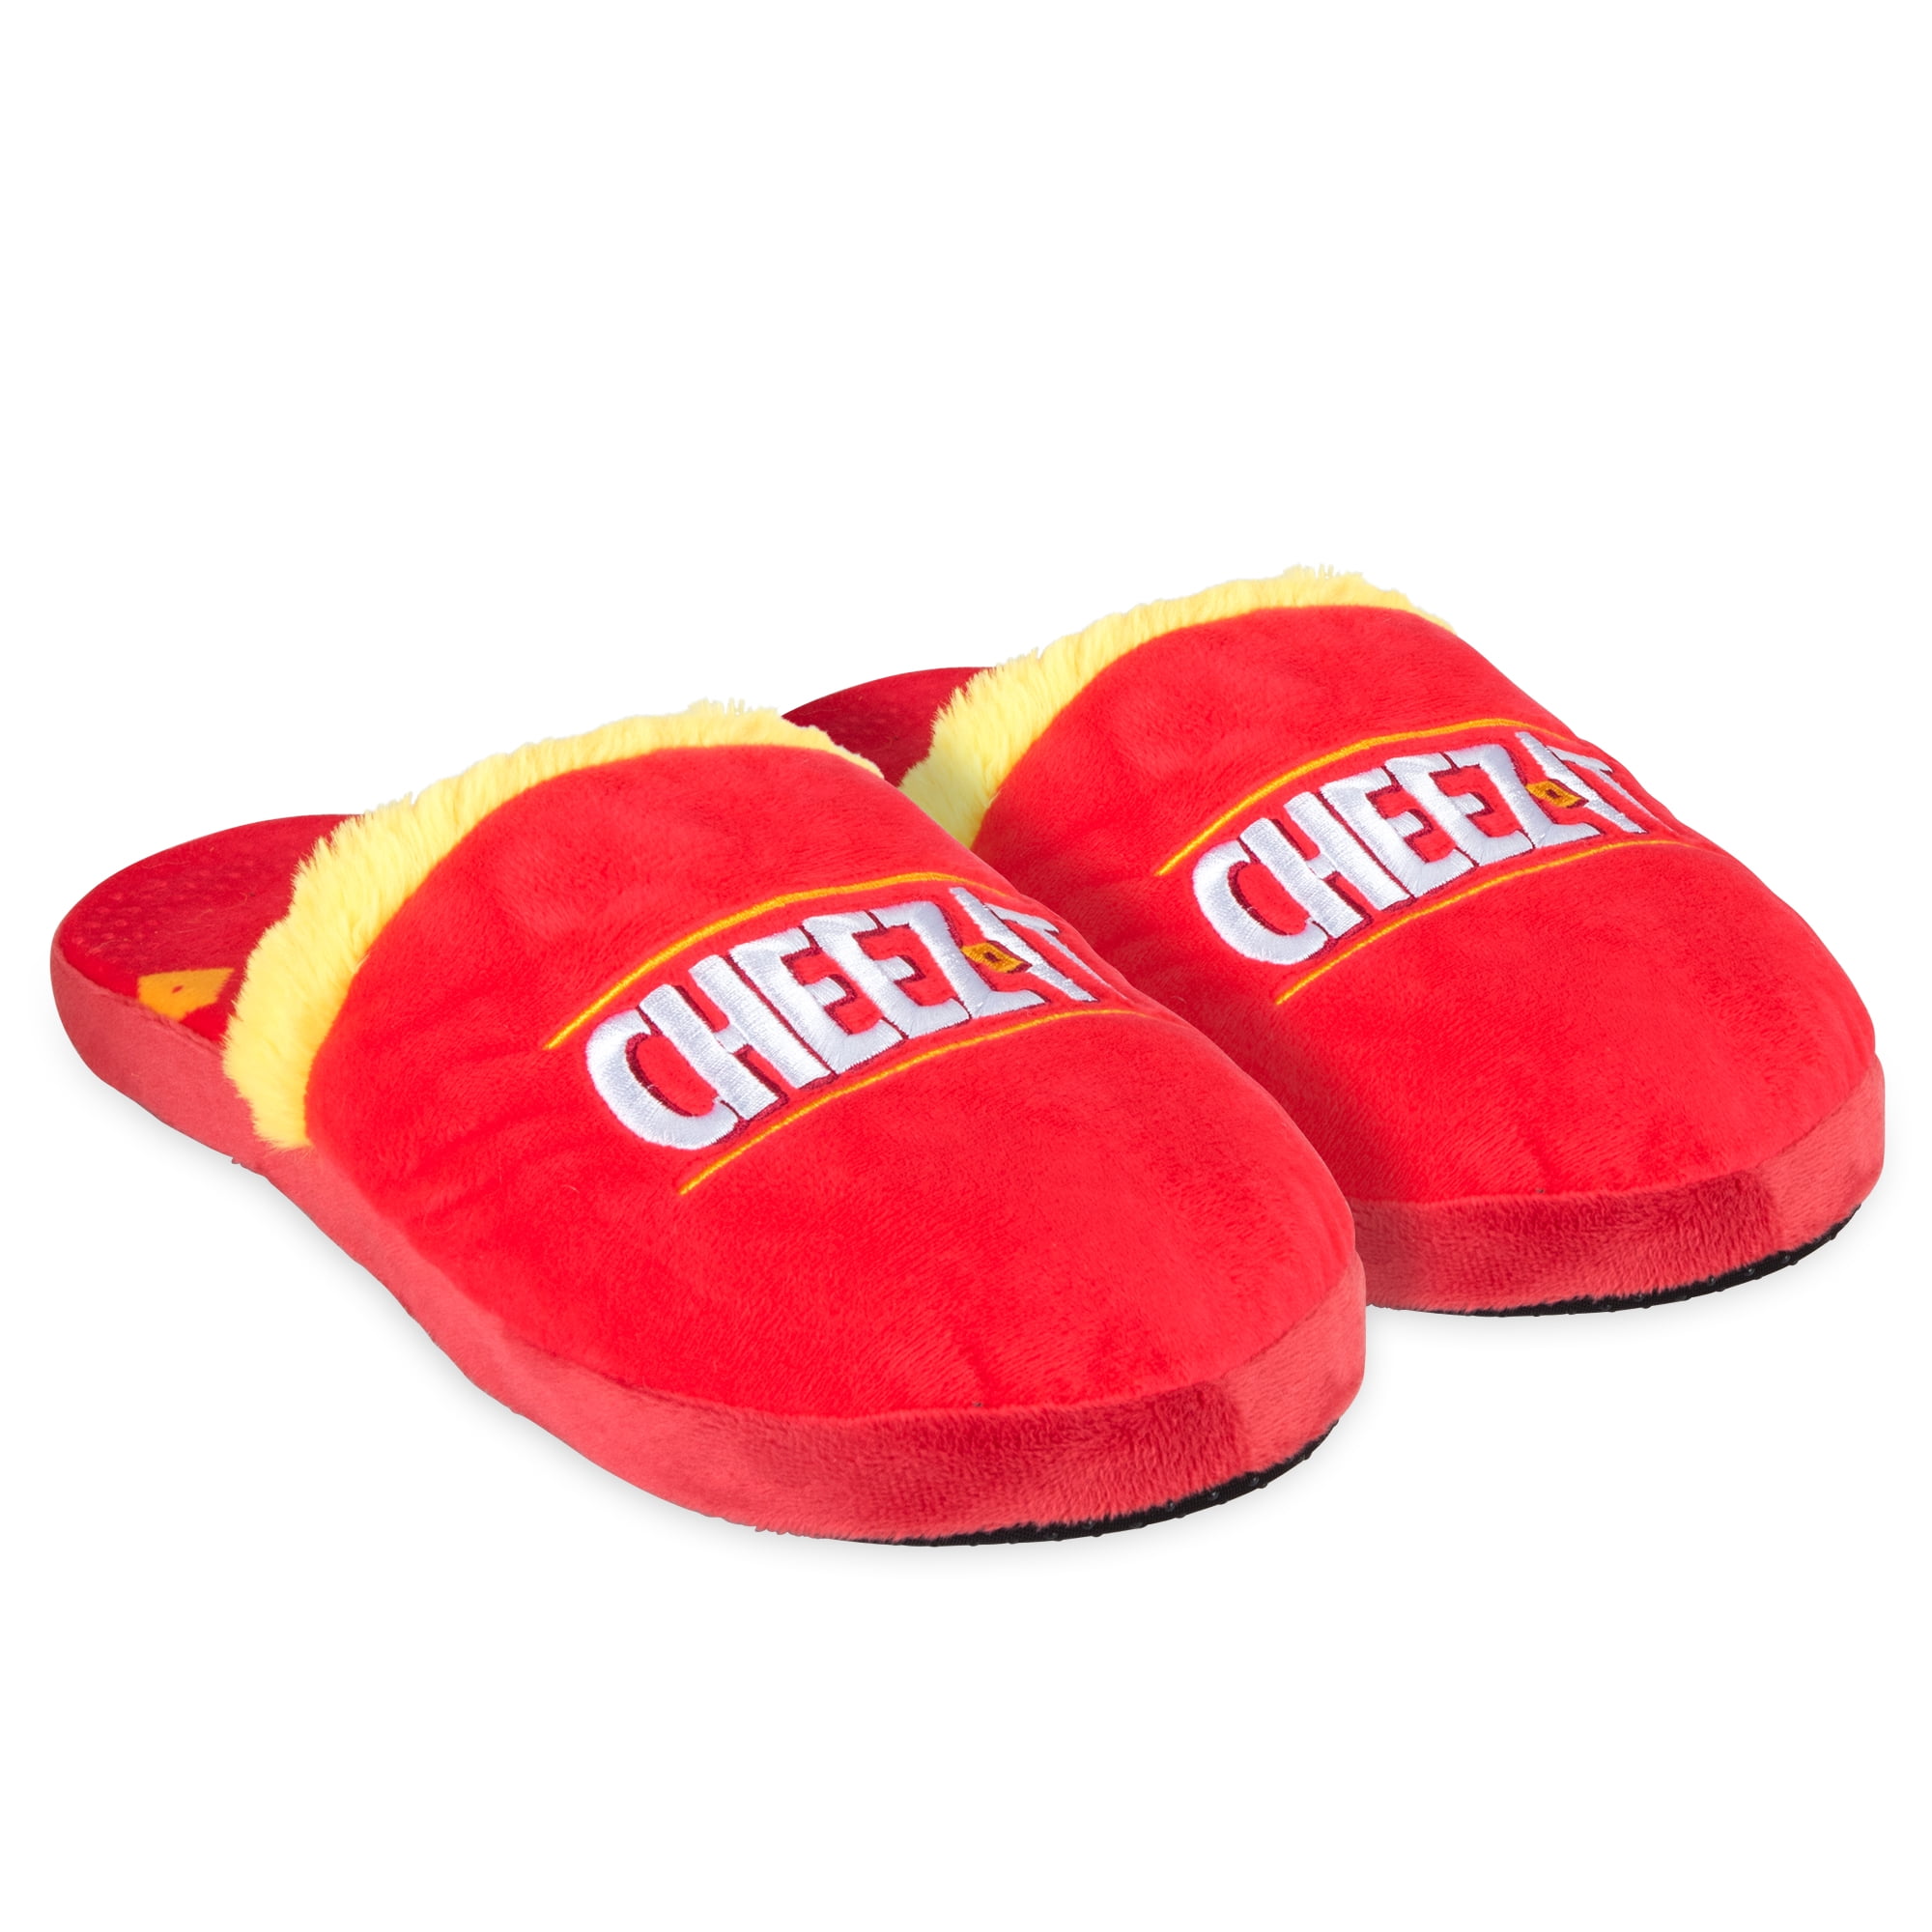 Odd Sox, Cheez It, Fun Indoor Novelty Slippers, Fuzzy Cozy, Large -